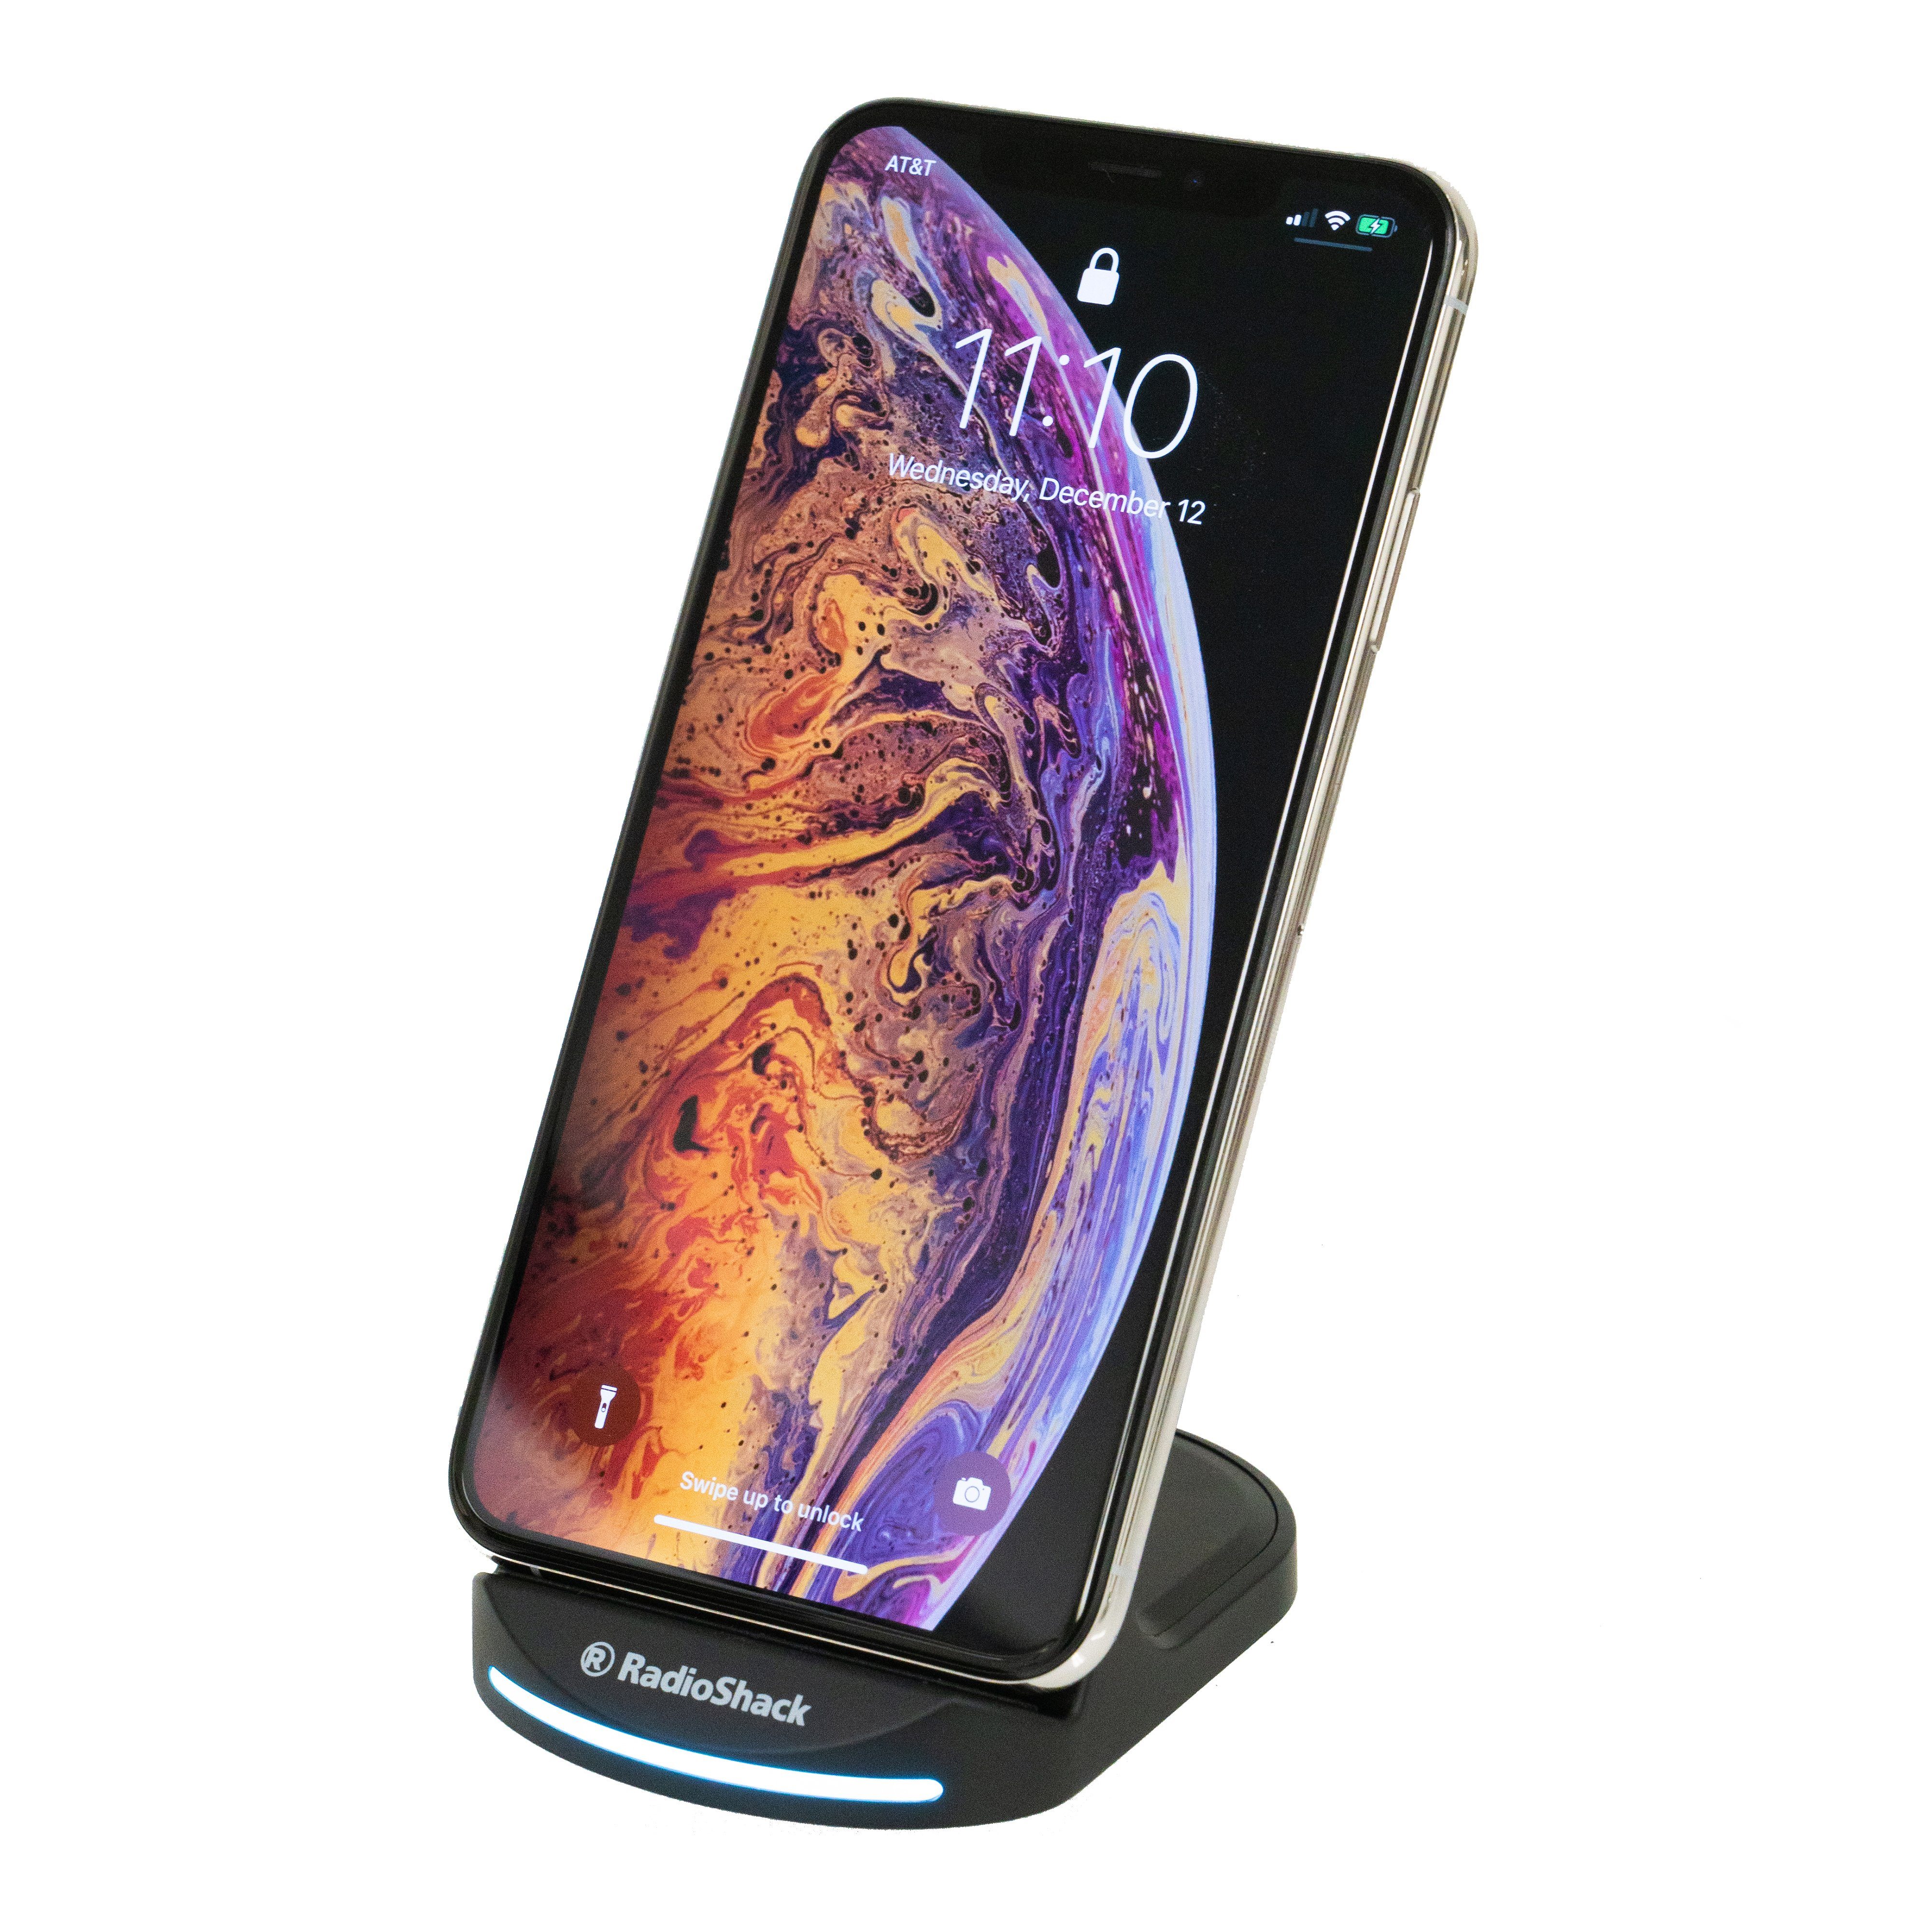 Image of Fast Wireless Charging Stand for Qi-Compatible Smartphones with Quick Charge 3.0 Compatible AC Adapter